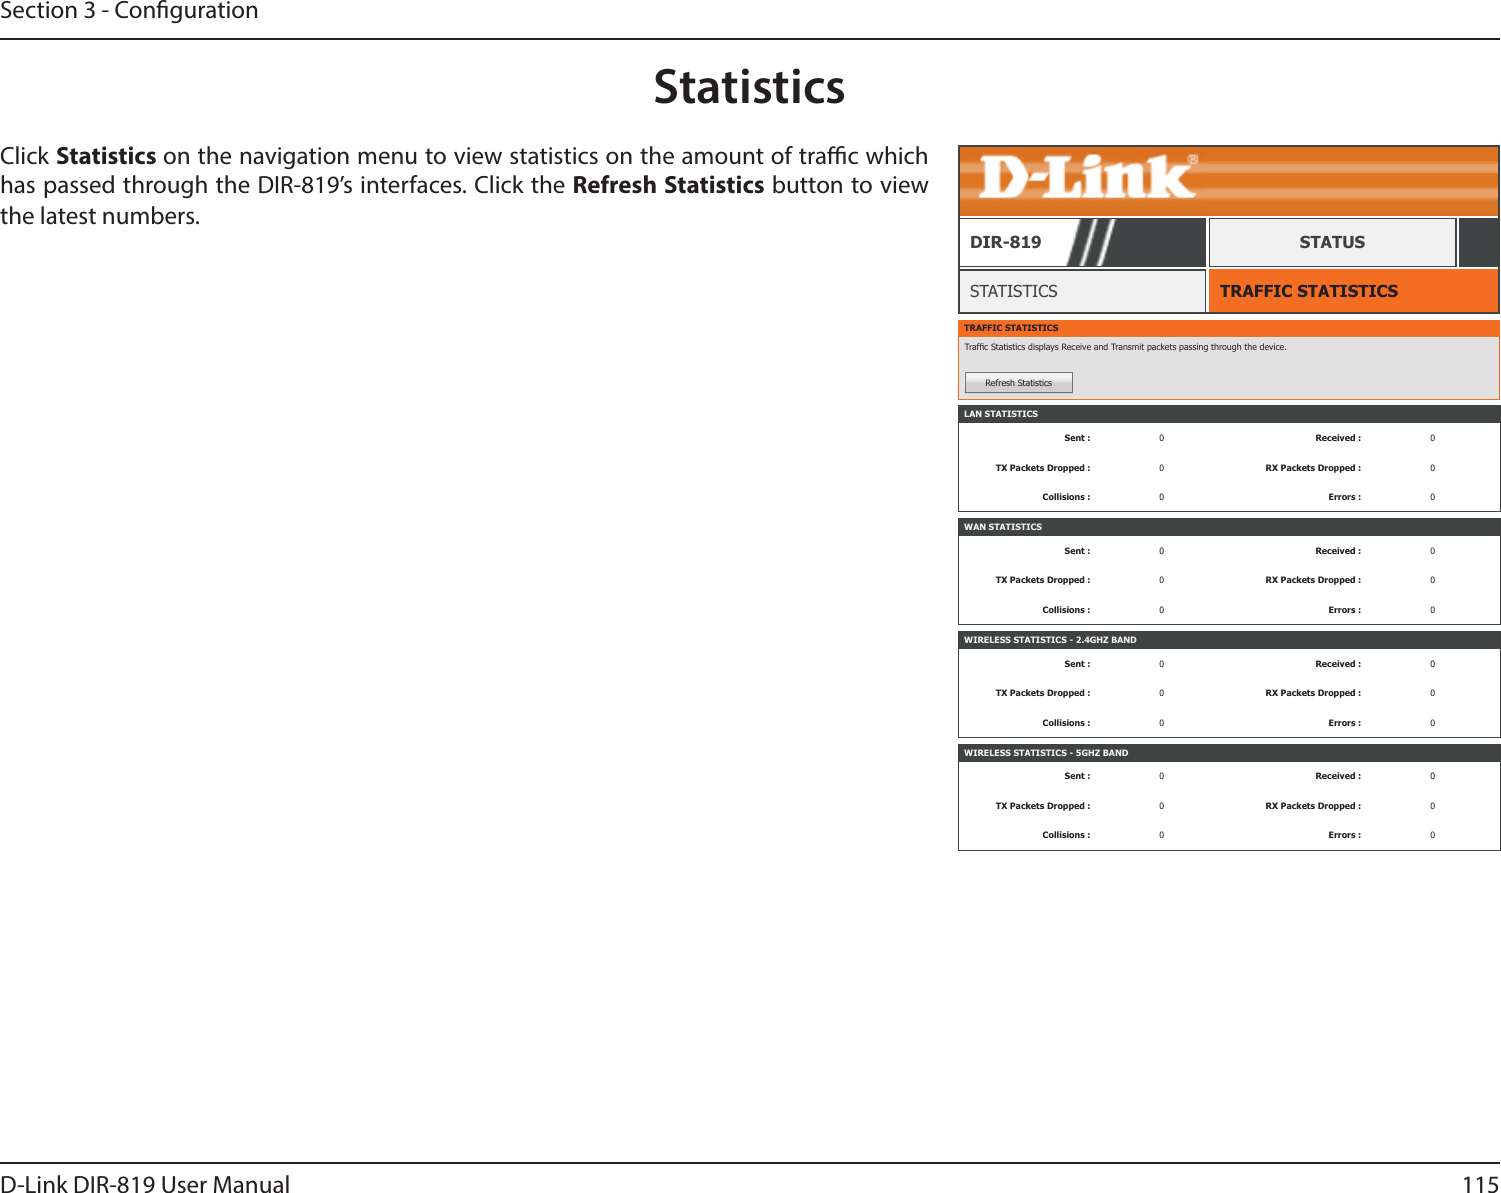 115D-Link DIR-819 User ManualSection 3 - CongurationStatisticsTRAFFIC STATISTICSSTATISTICSDIR-819 STATUSClick Statistics on the navigation menu to view statistics on the amount of trac which has passed through the DIR-819’s interfaces. Click the Refresh Statistics button to view the latest numbers. TRAFFIC STATISTICSTrafc Statistics displays Receive and Transmit packets passing through the device.Refresh StatisticsLAN STATISTICSSent : 0Received : 0TX Packets Dropped : 0RX Packets Dropped : 0Collisions : 0Errors : 0WAN STATISTICSSent : 0Received : 0TX Packets Dropped : 0RX Packets Dropped : 0Collisions : 0Errors : 0WIRELESS STATISTICS - 2.4GHZ BANDSent : 0Received : 0TX Packets Dropped : 0RX Packets Dropped : 0Collisions : 0Errors : 0WIRELESS STATISTICS - 5GHZ BANDSent : 0Received : 0TX Packets Dropped : 0RX Packets Dropped : 0Collisions : 0Errors : 0